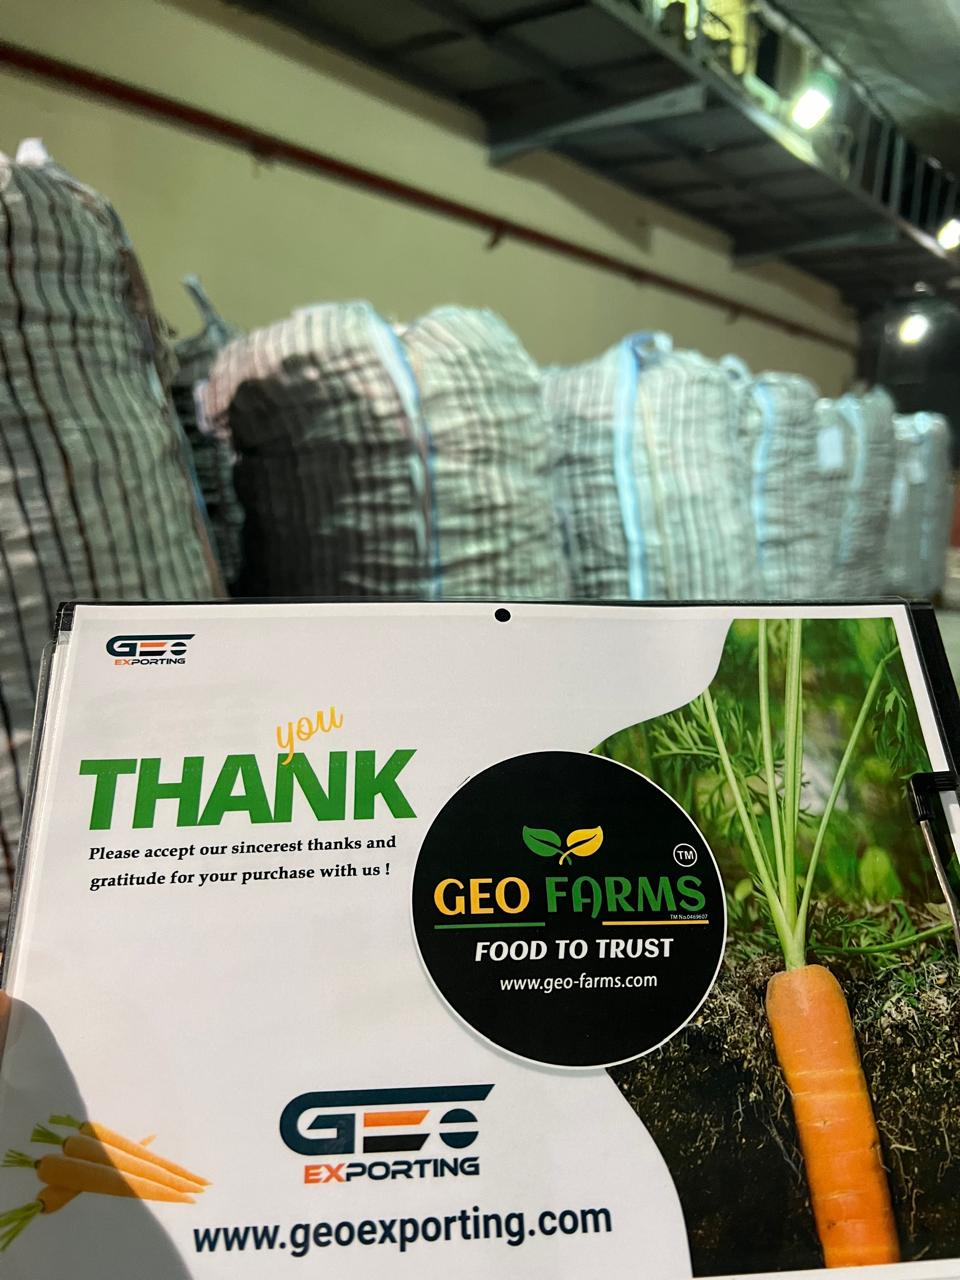 Jumbo Bags of Carrots from GEO FARMS egypt